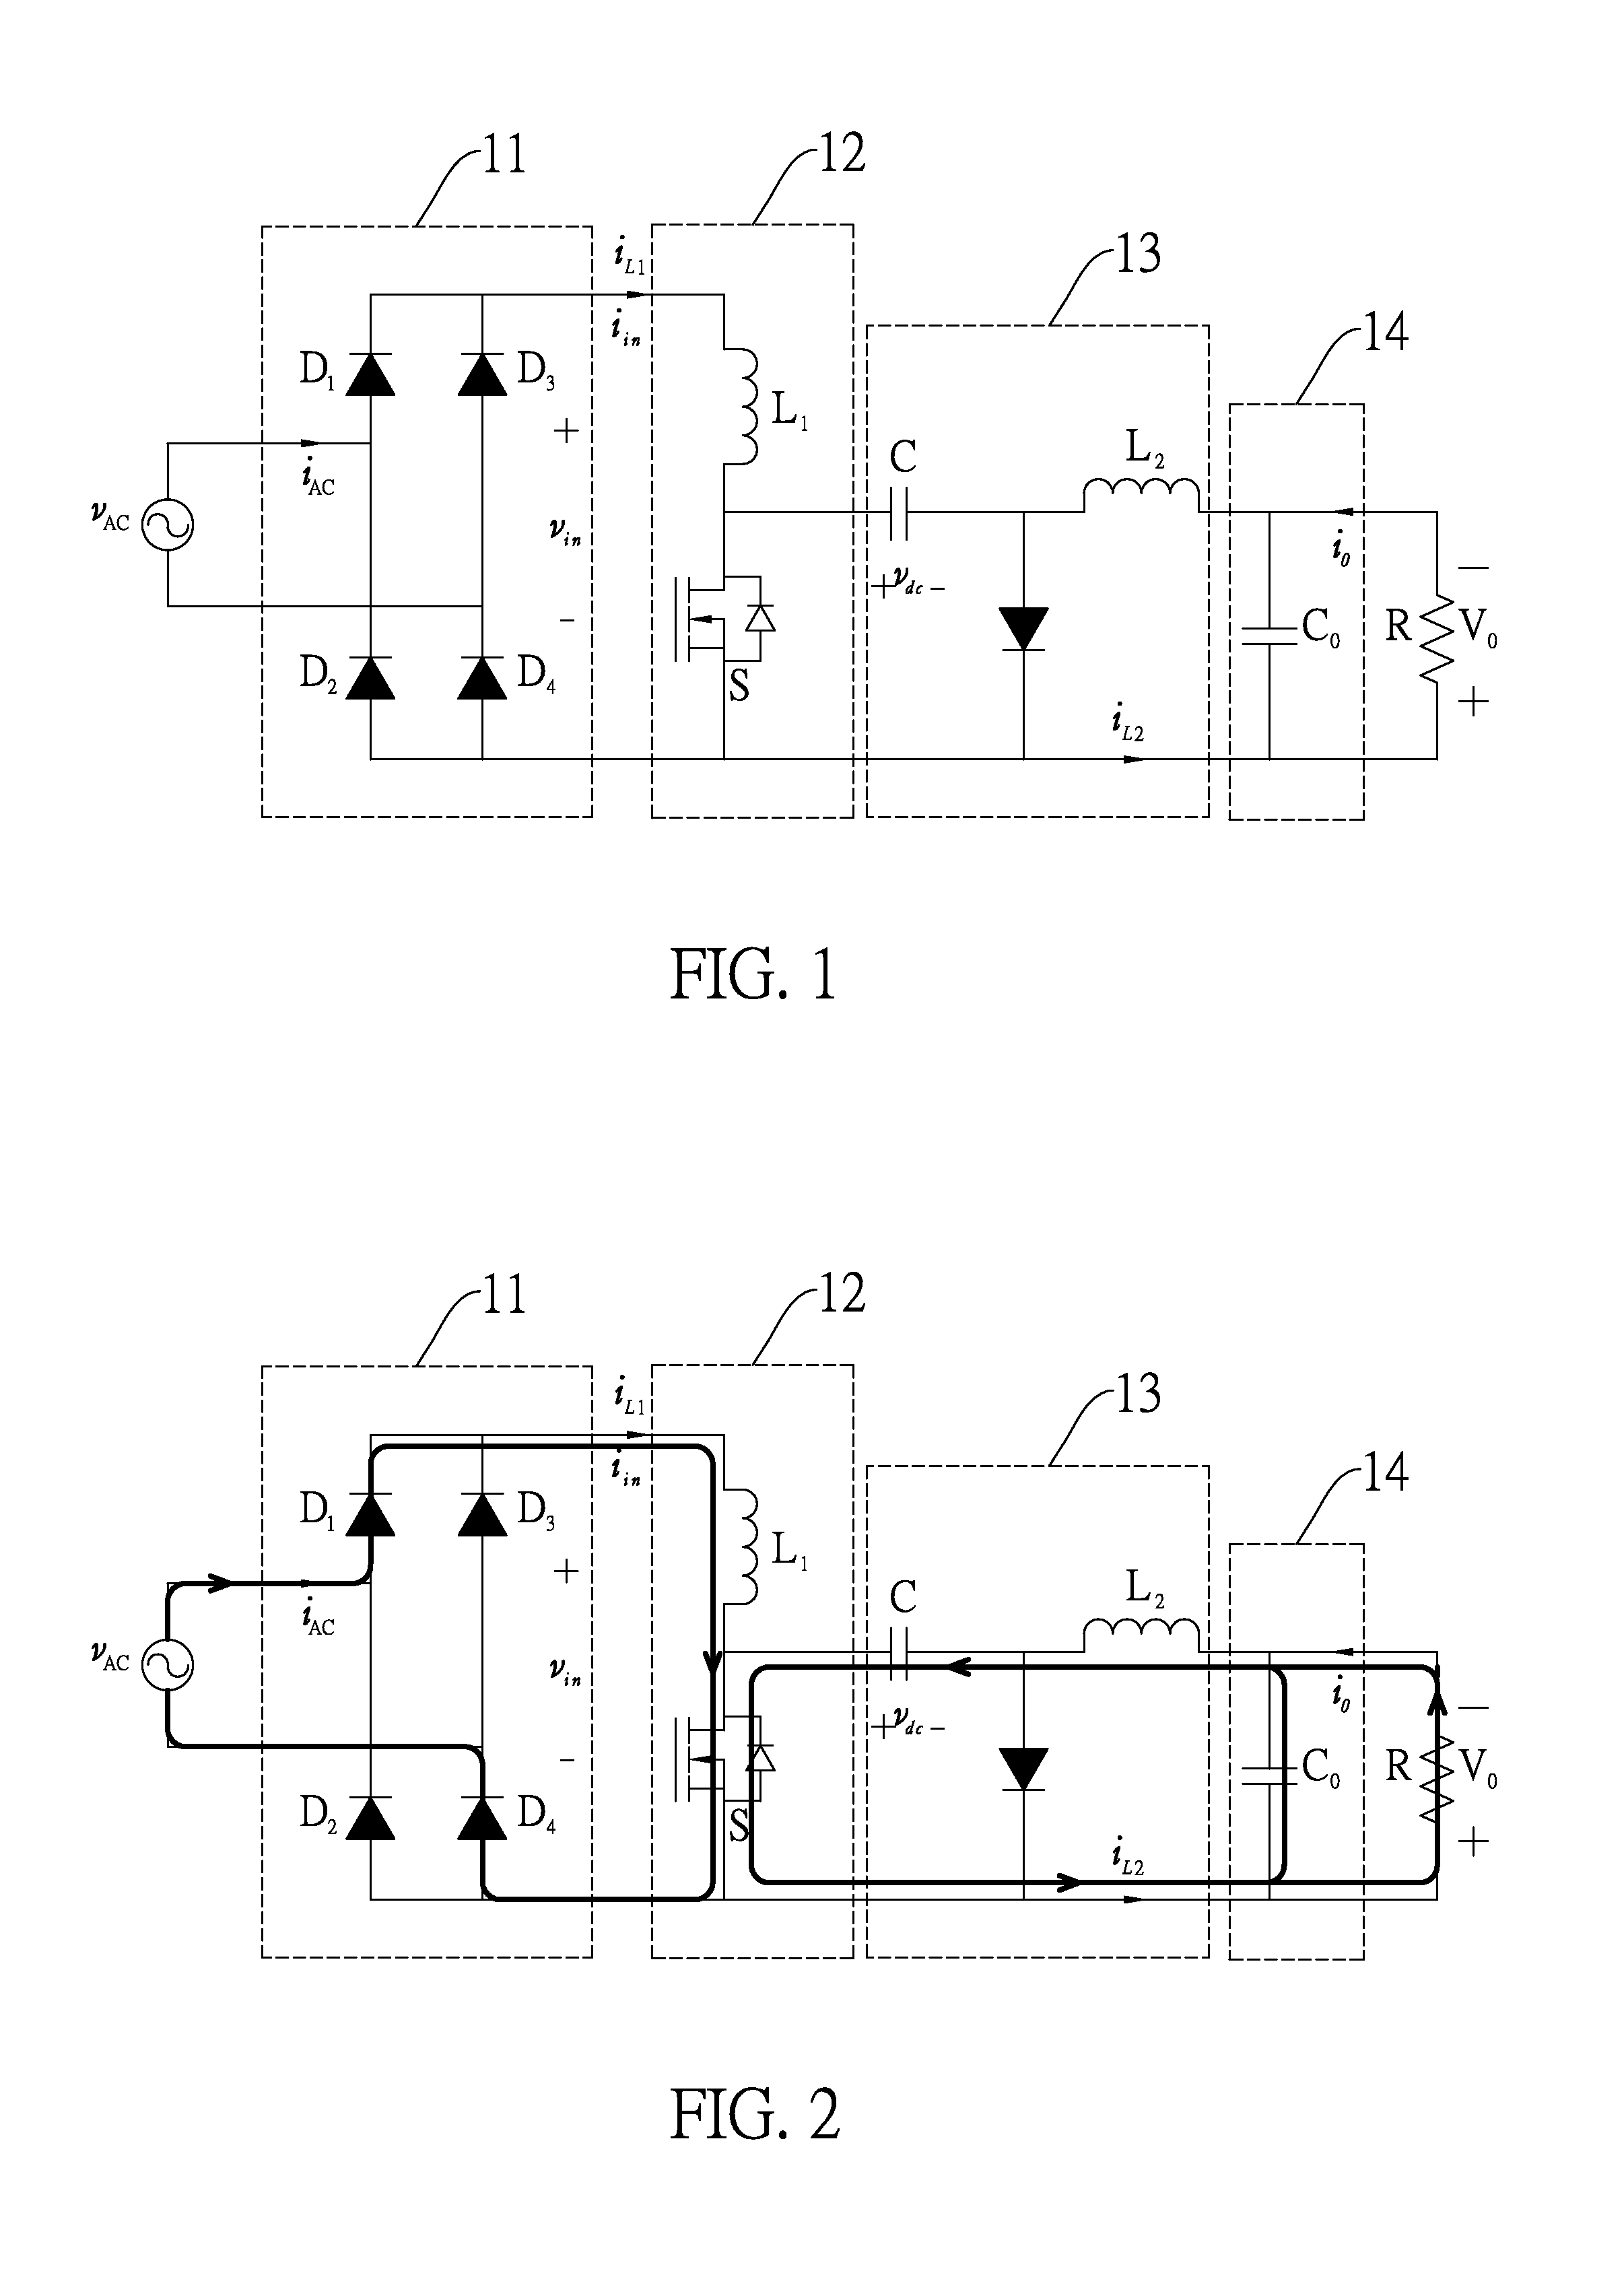 Non-isolated AC/DC converter with power factor correction